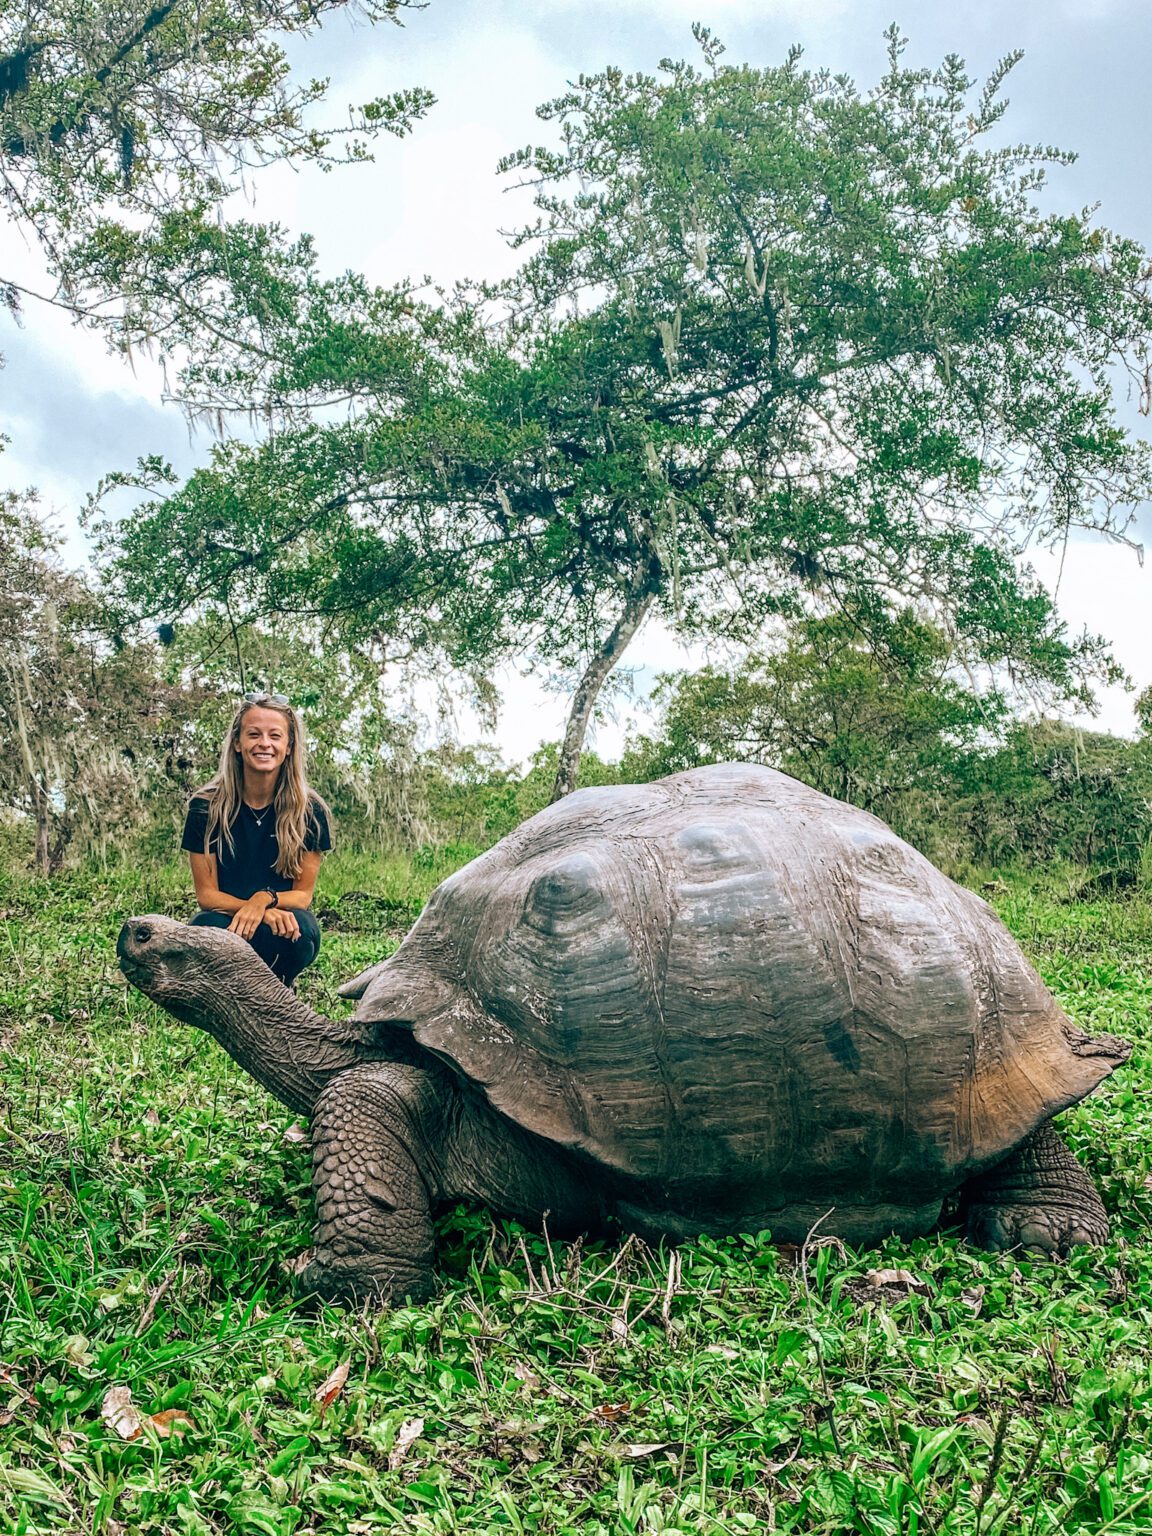 a woman kneeling down next to a giant turtle.